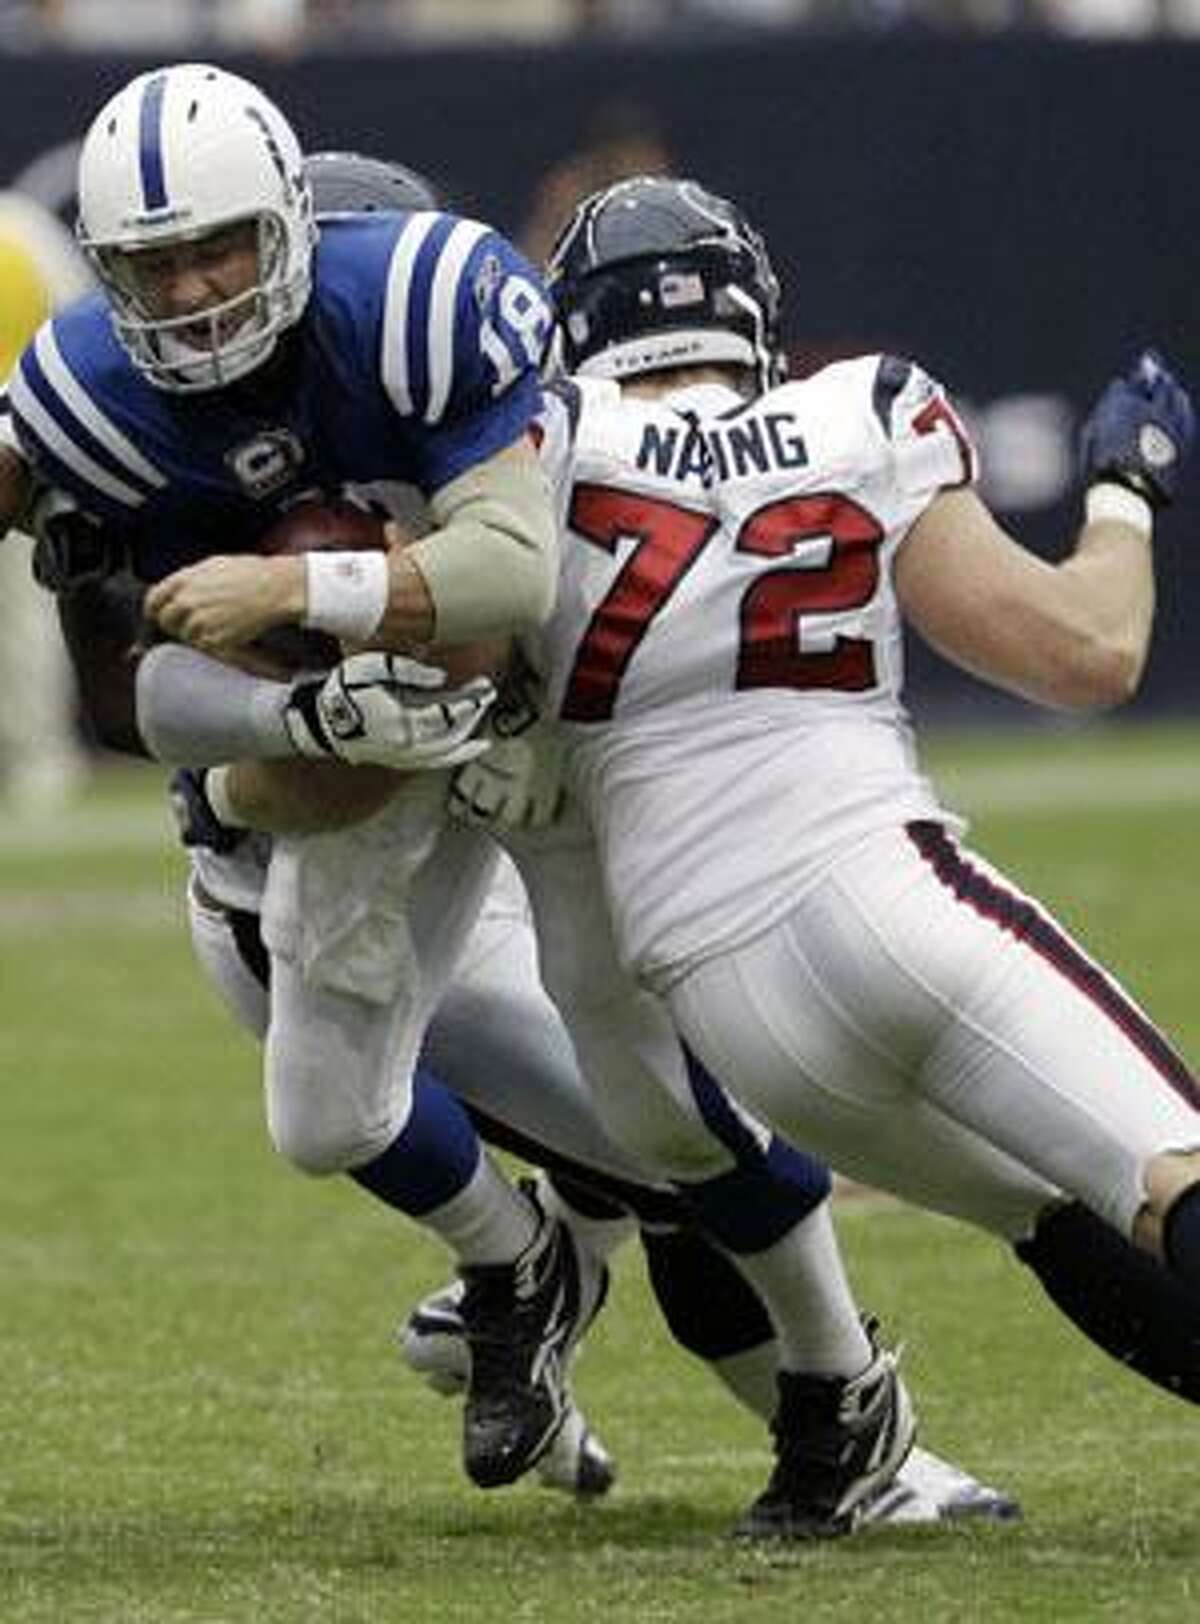 AP Indianapolis Colts quarterback Peyton Manning (18) is sacked by Houston Texans' Jess Nading (72) and another Texan, rear, during the third quarter of a Sept. 12 game in Houston. Manning looked like himself Wednesday. He stood tall, spoke with that down home drawl and answered all the questions. But after last week's loss in Houston, Manning is hoping he can at least stay upright in the pocket Sunday night.